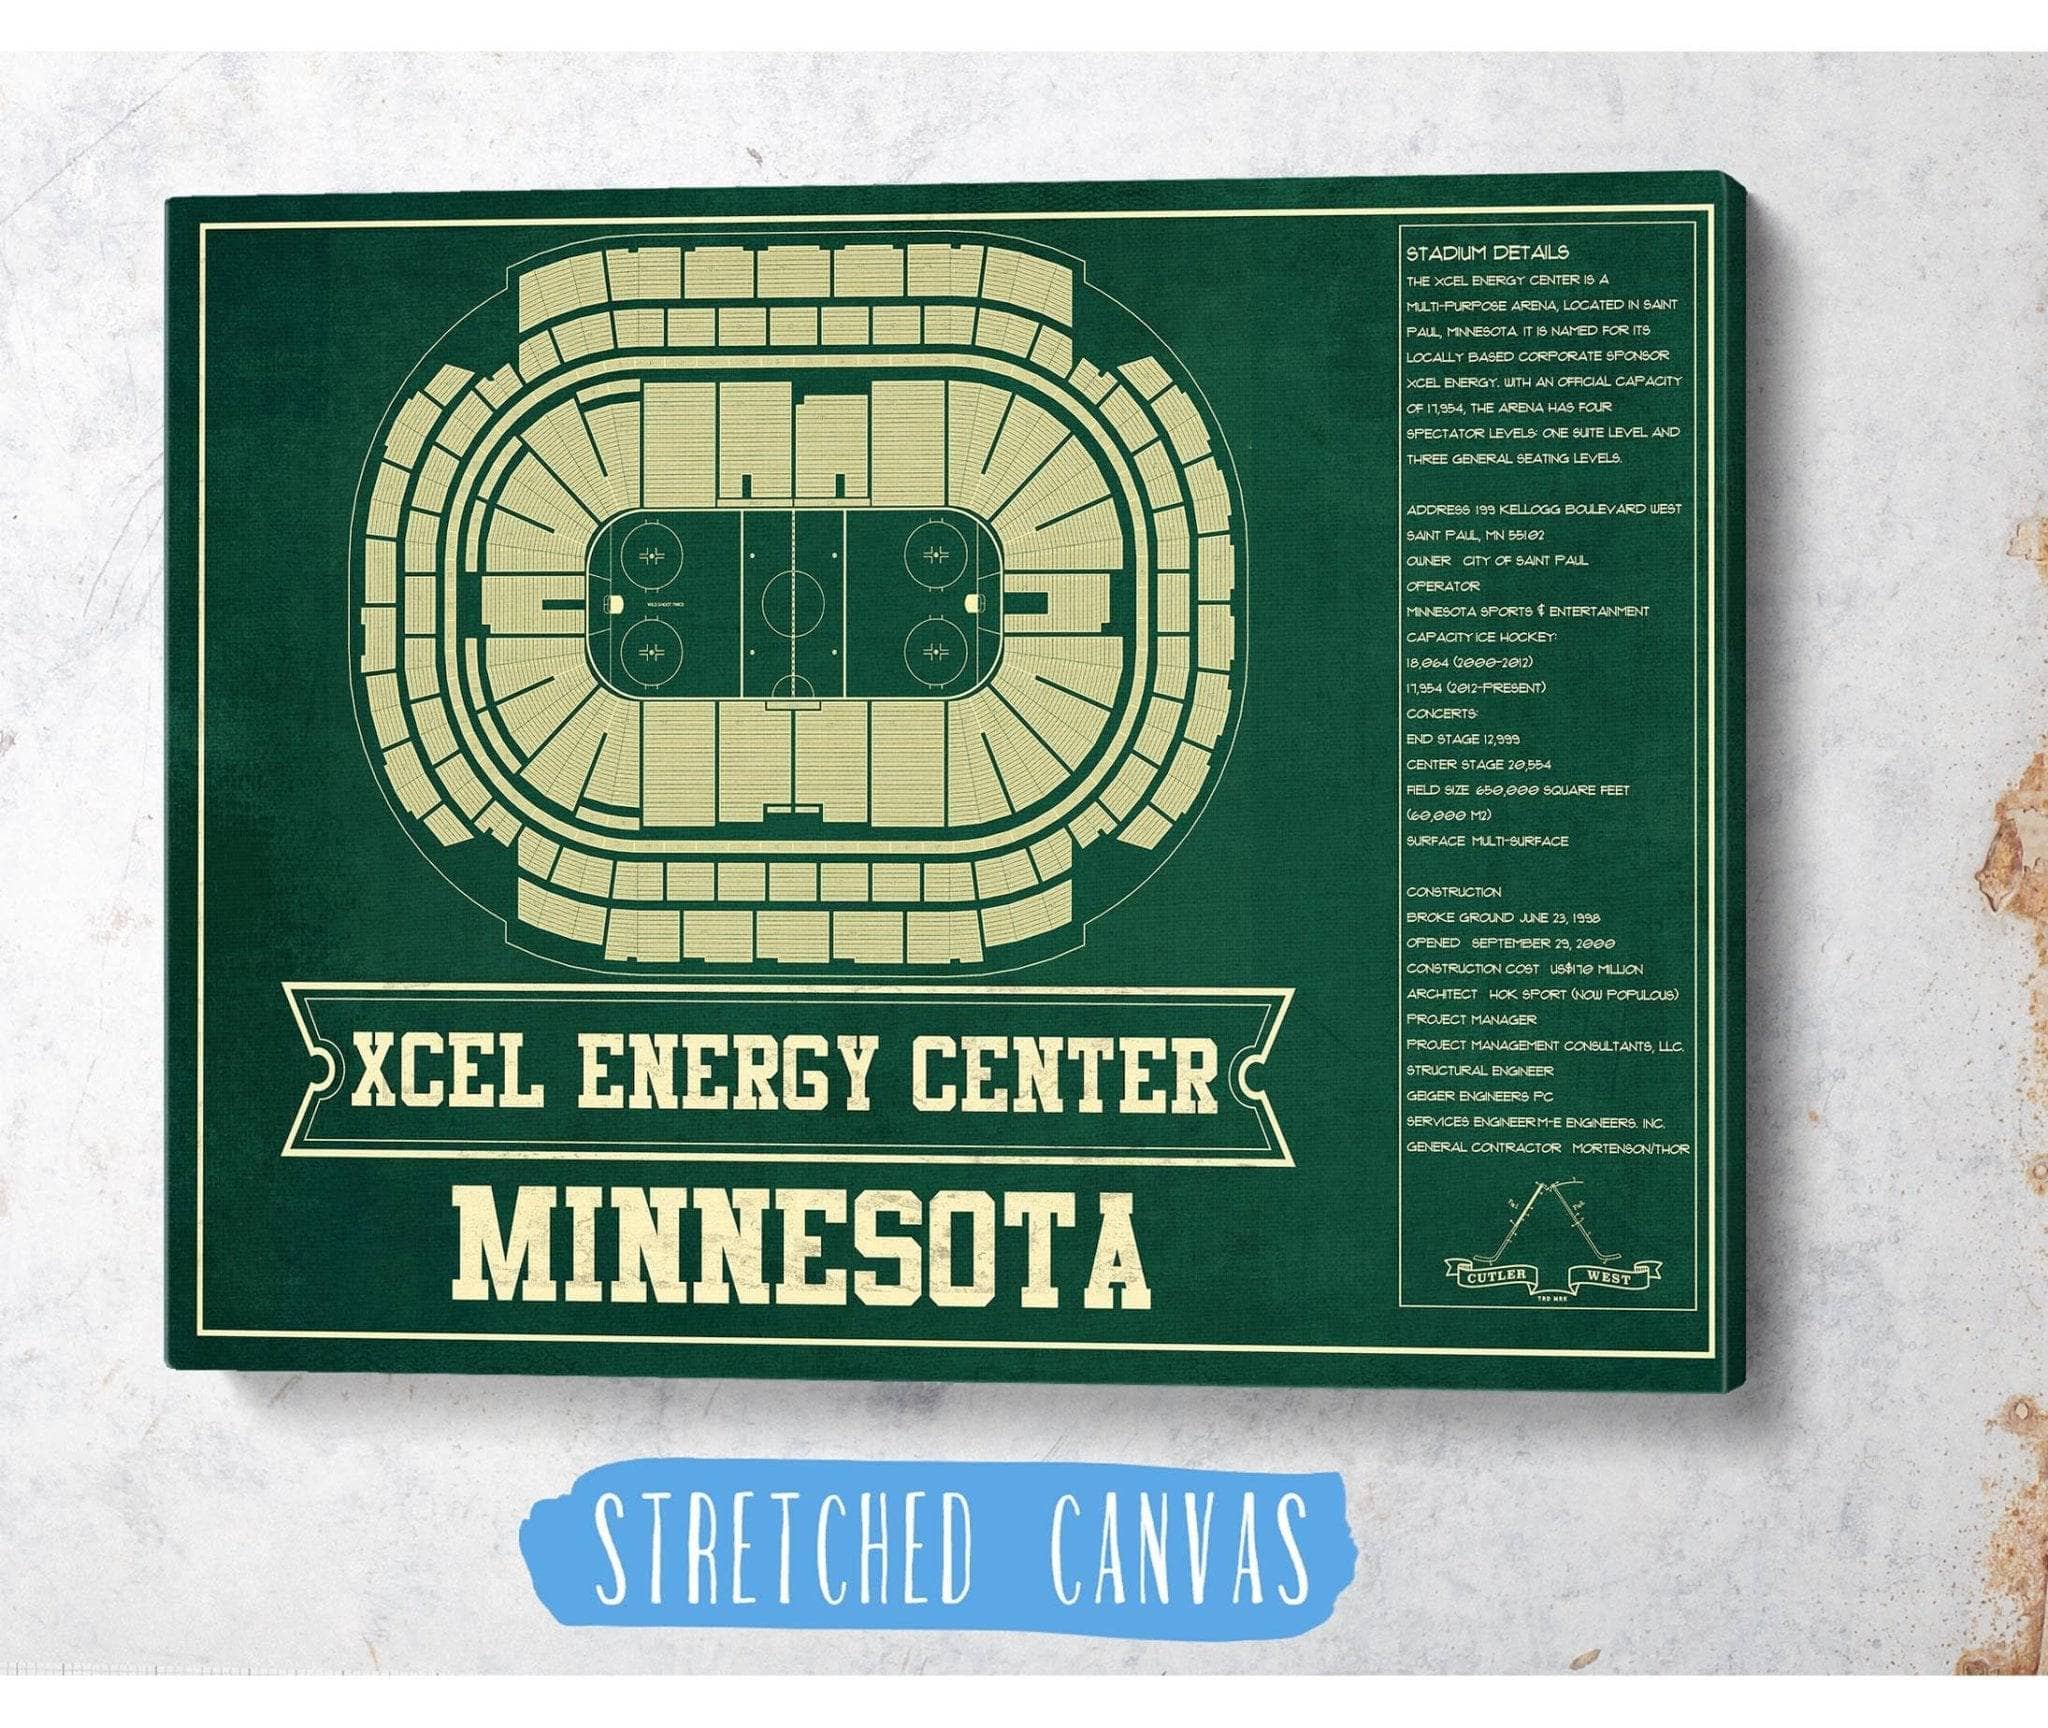 Seating Charts  Xcel Energy Center